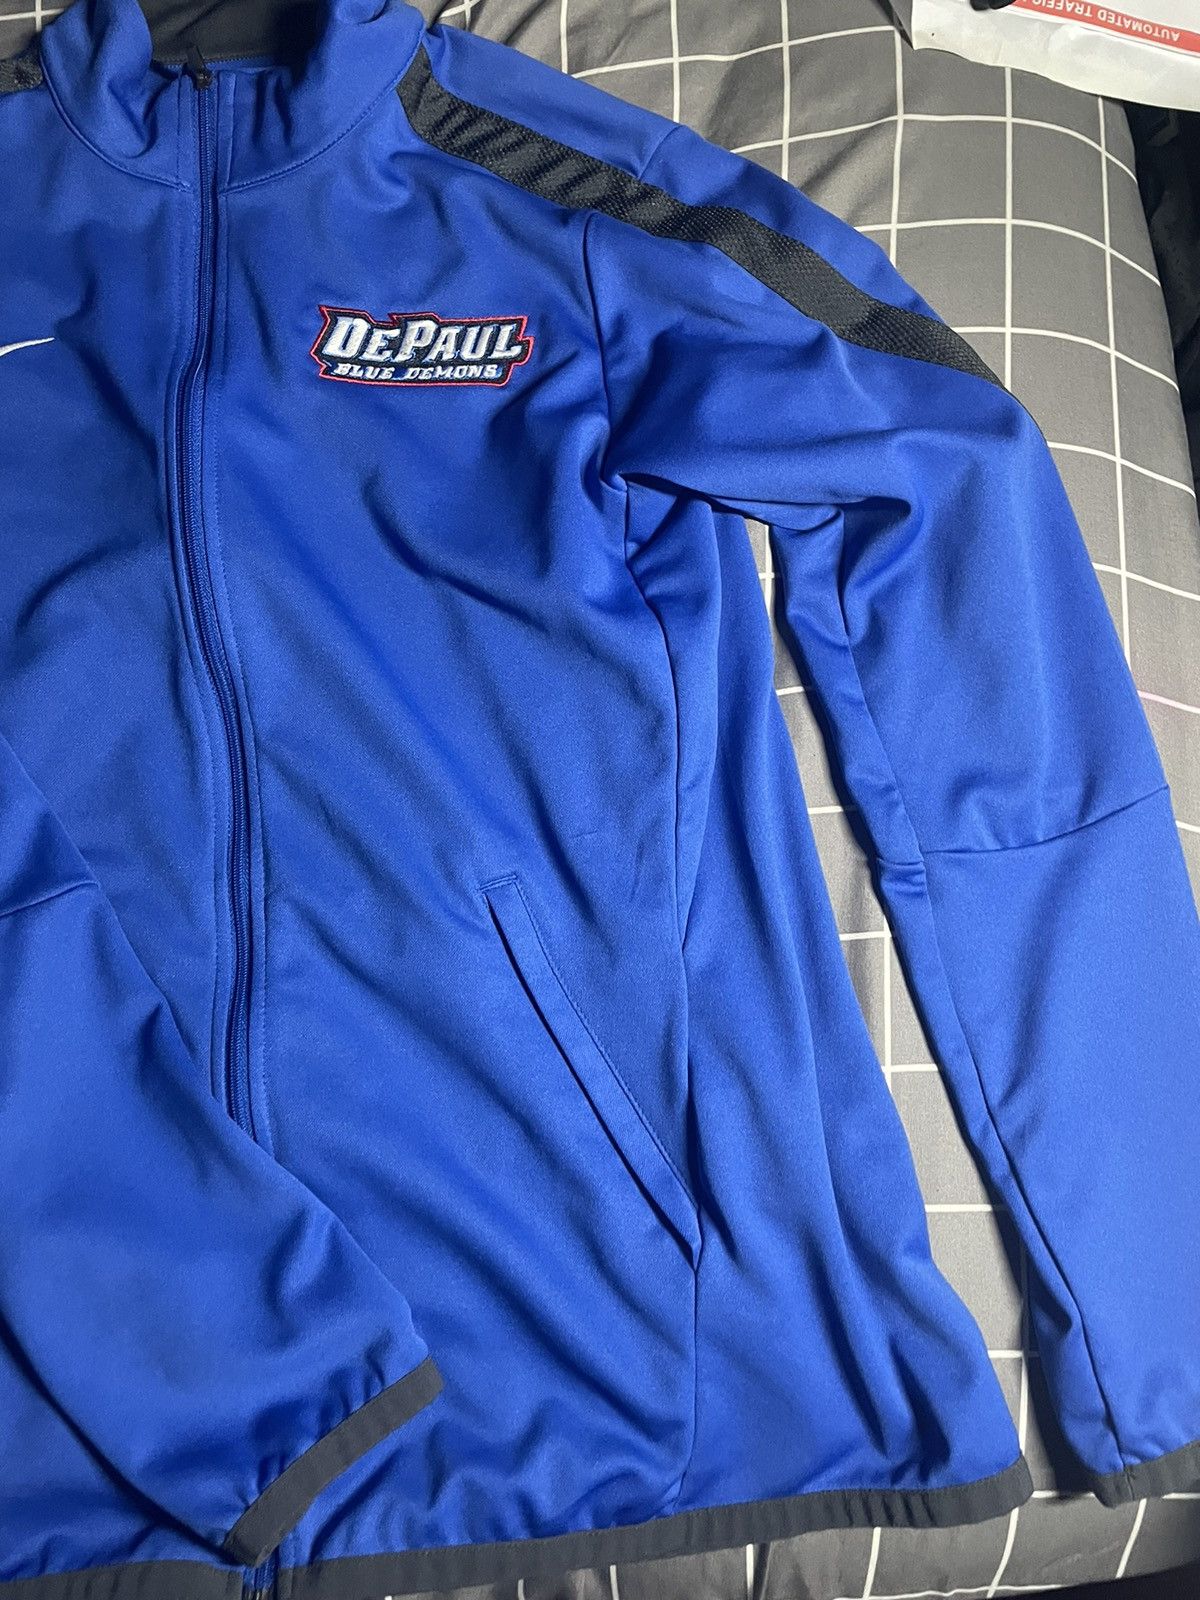 Nike depaul warm up Size US S / EU 44-46 / 1 - 1 Preview